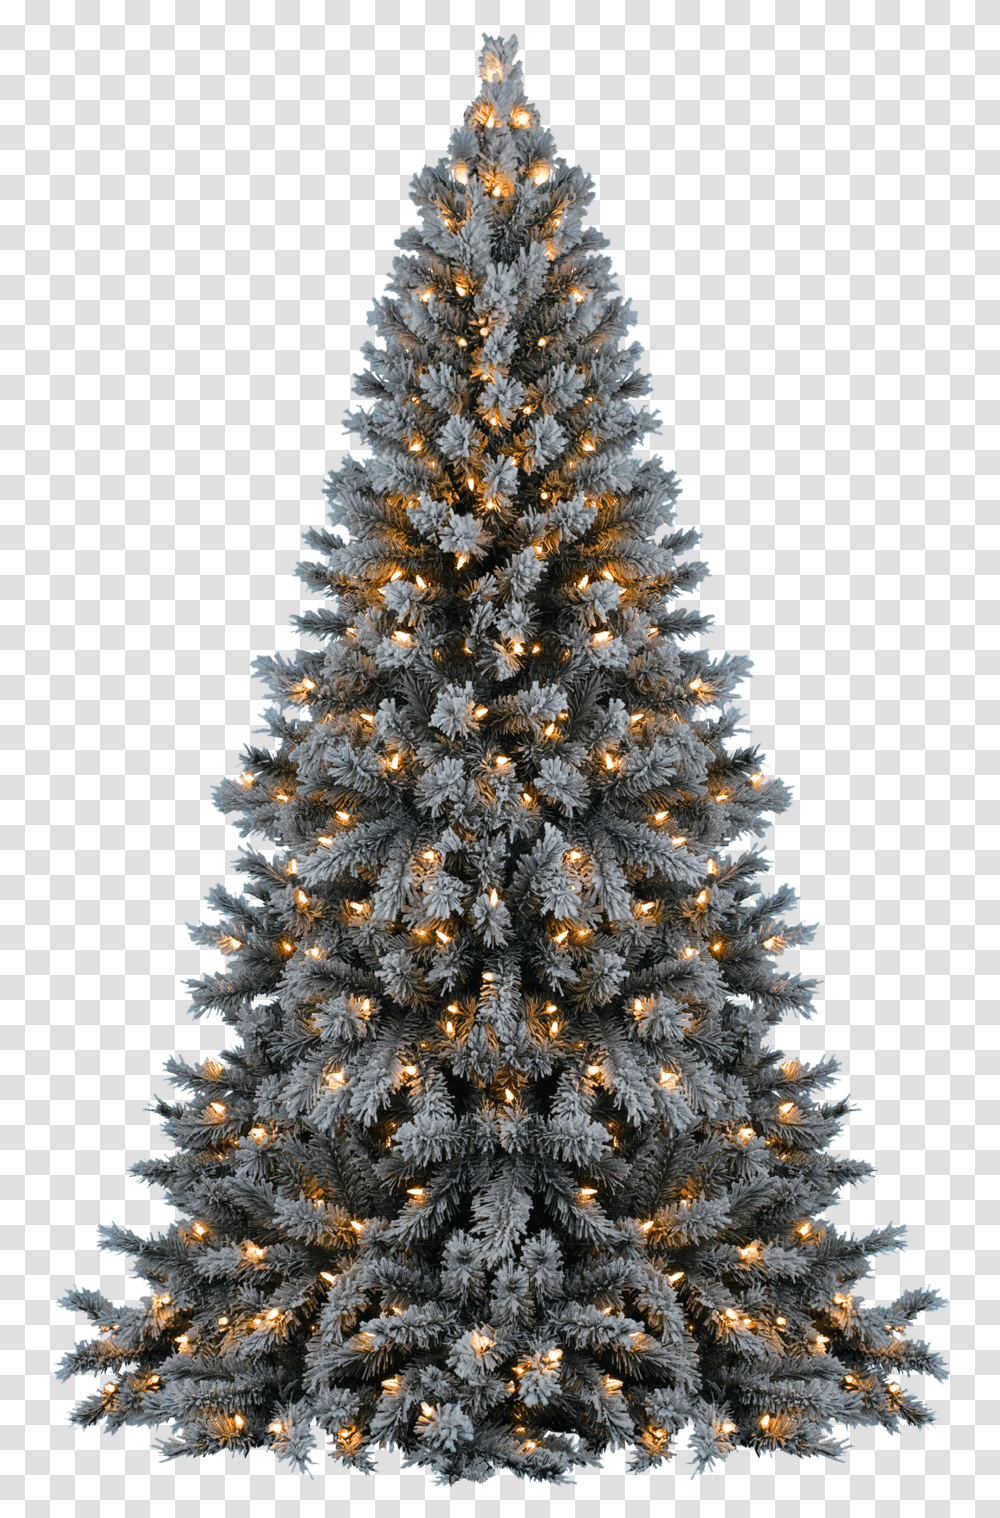 Christmas Tree Hq Image Justin Bieber Christmas Tree, Ornament, Plant, Fir, Abies Transparent Png